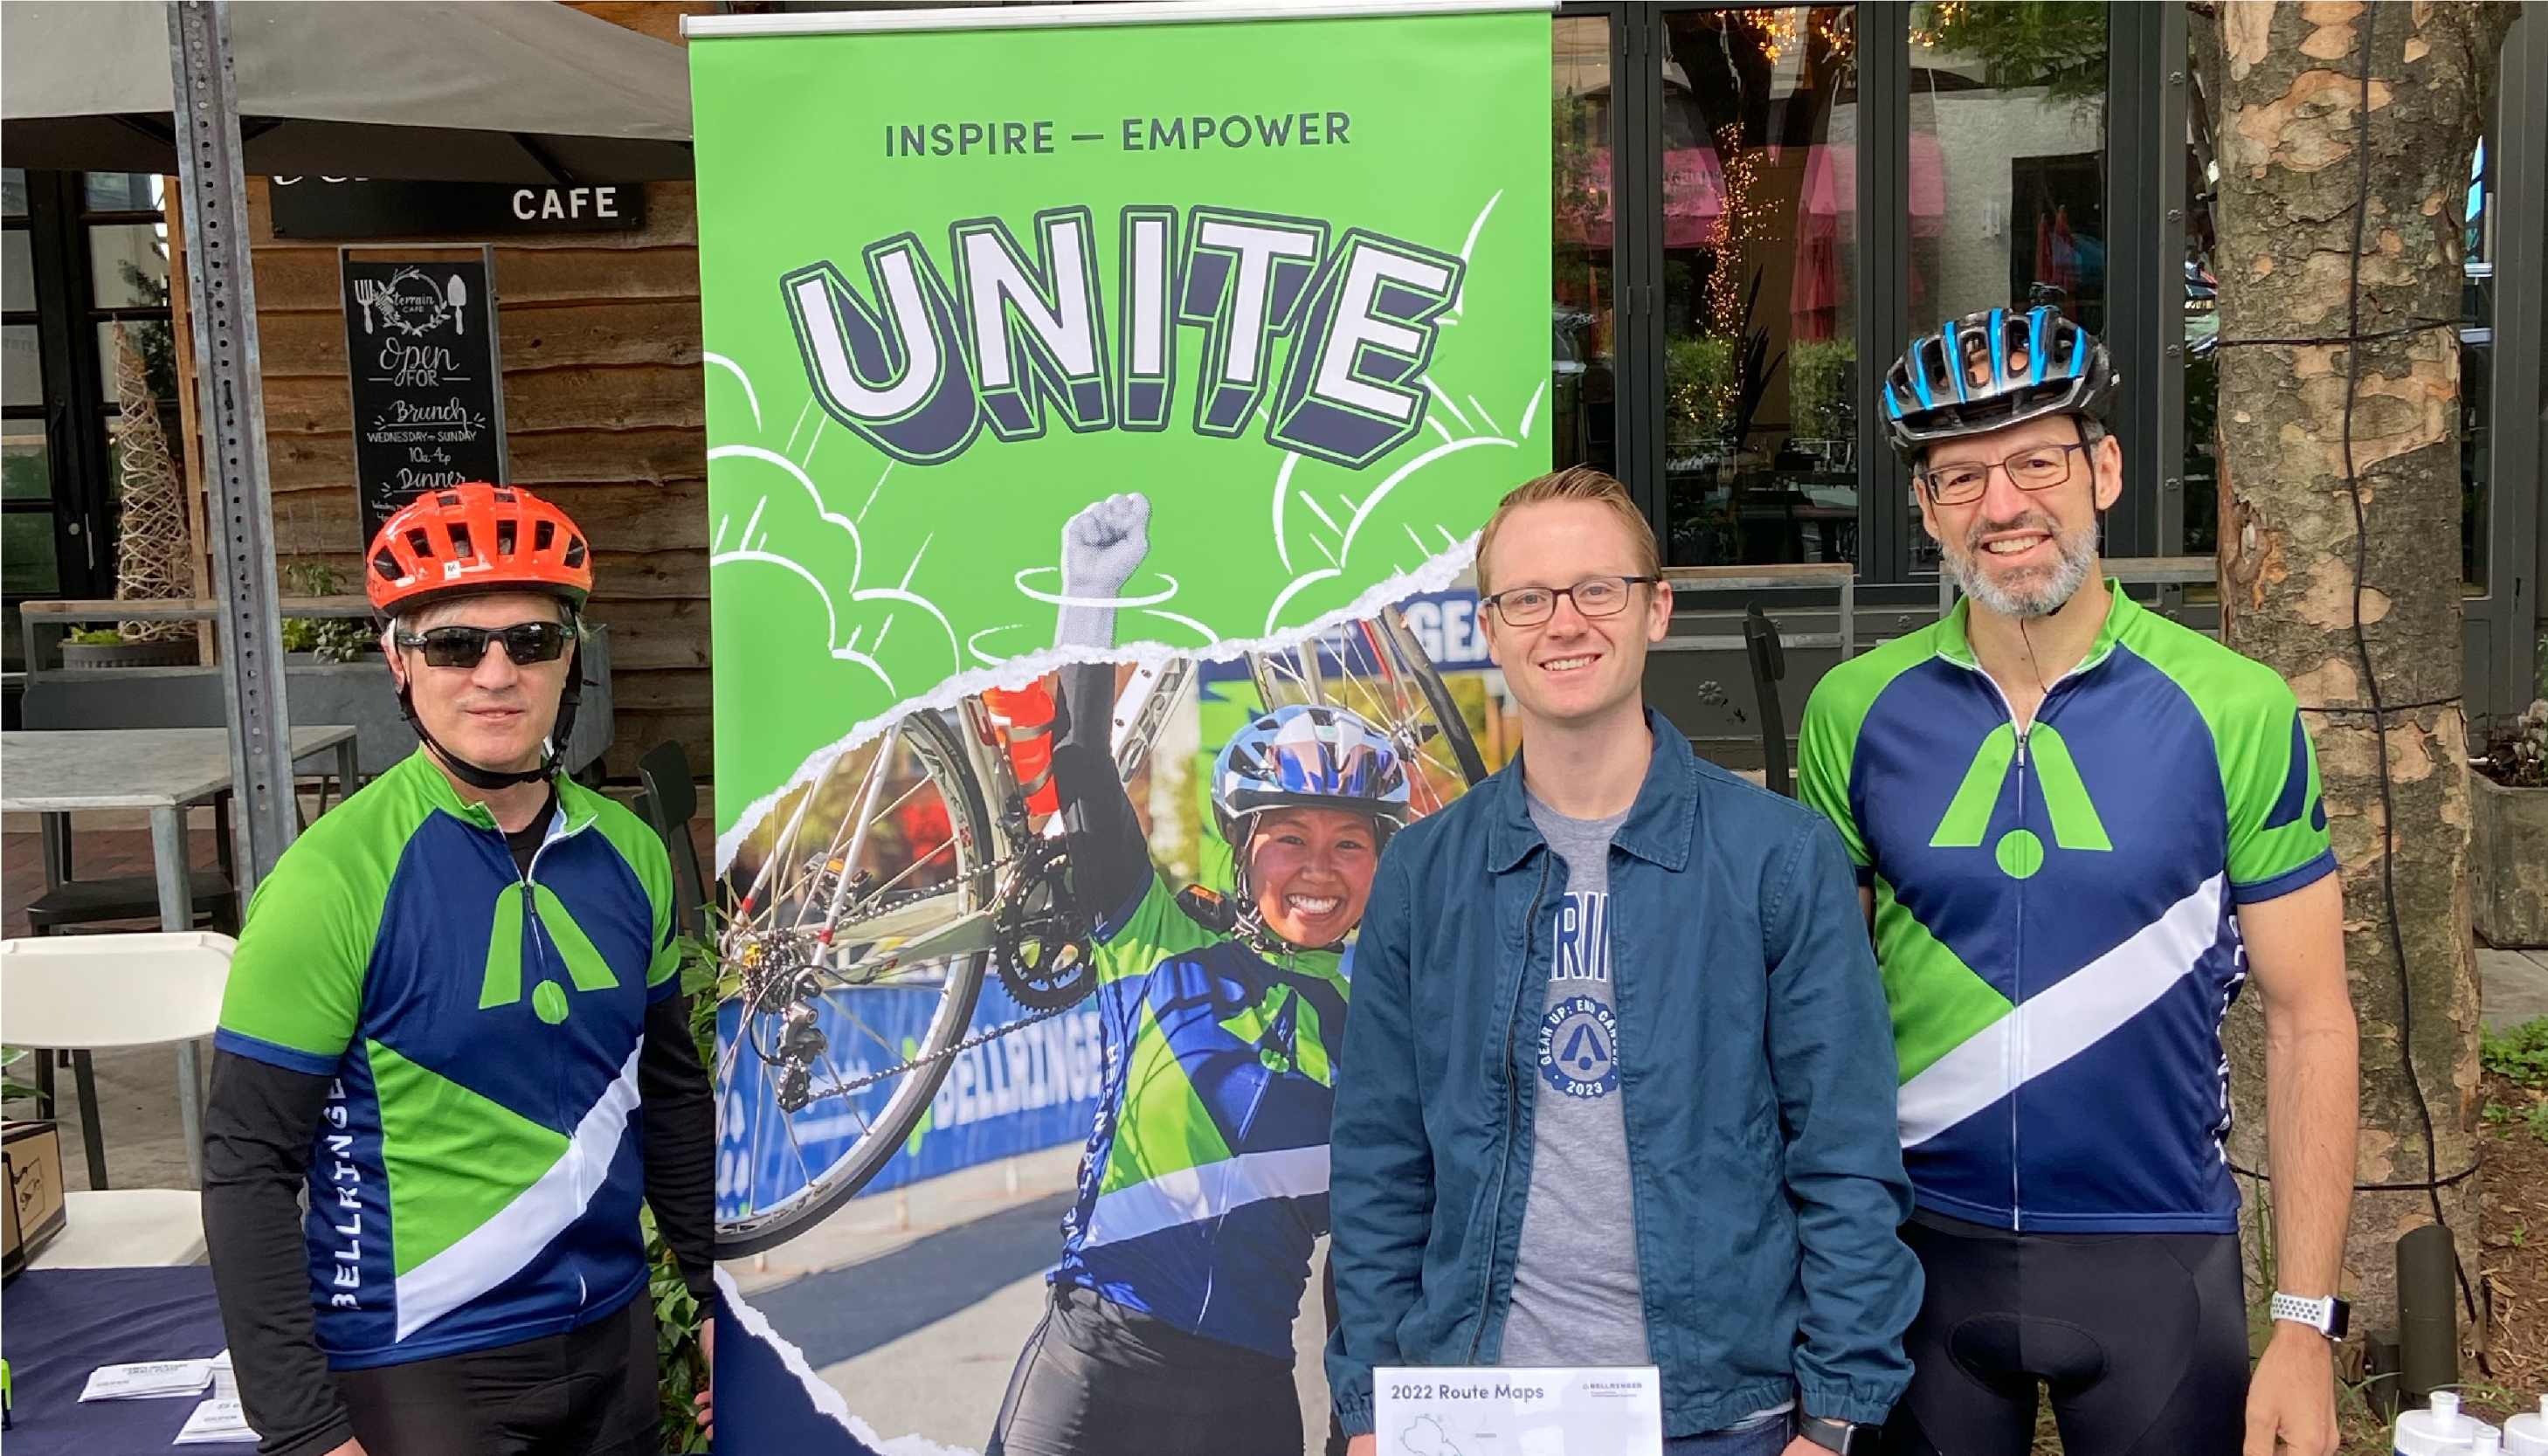 Three BellRinger riders posing in front of a inspire empower unite sign